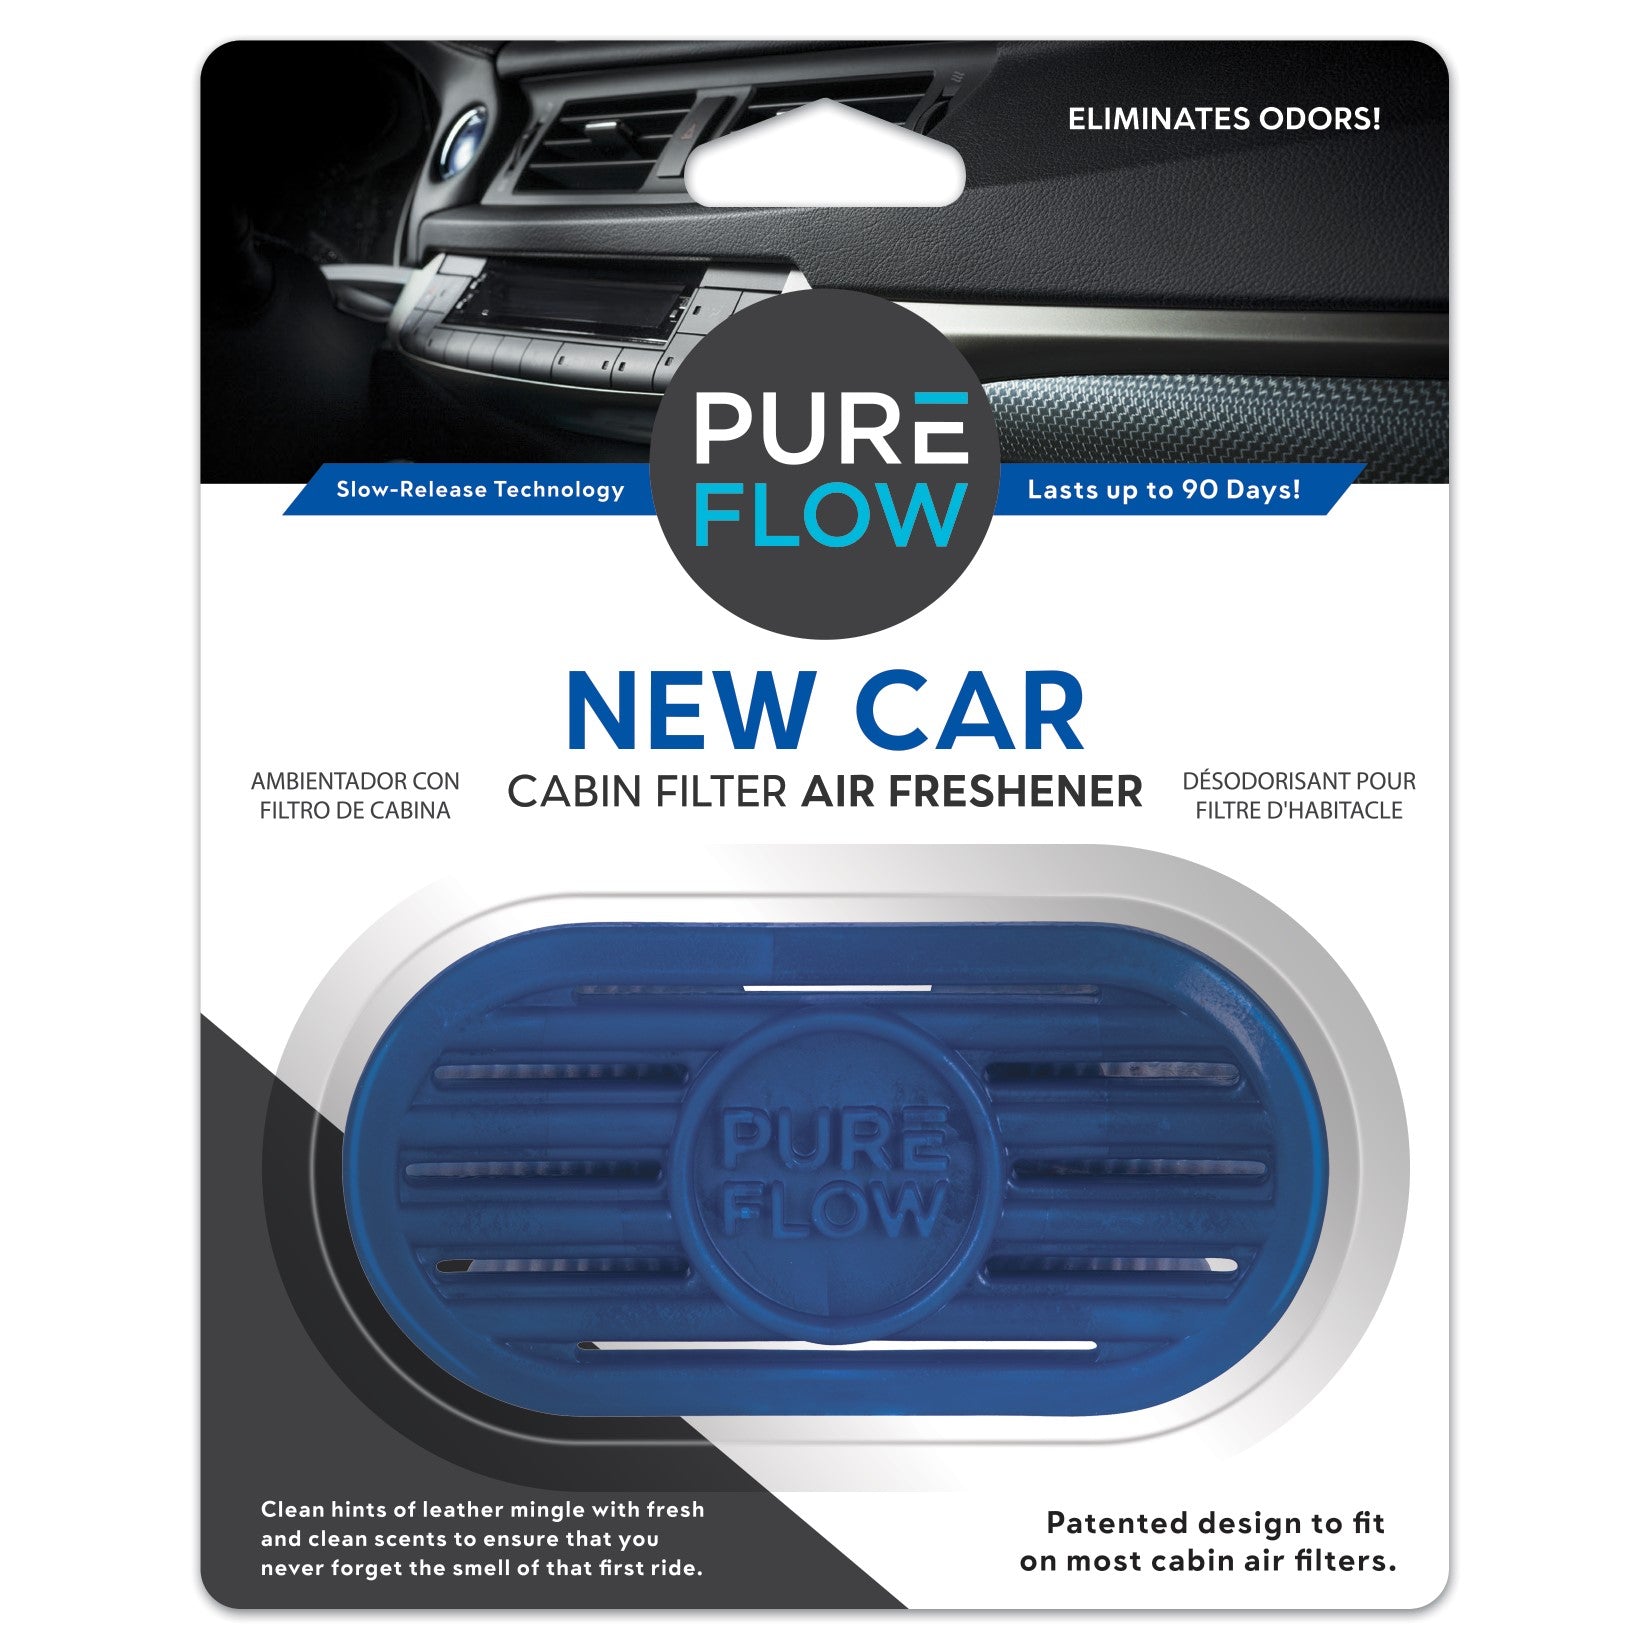 New Car Smell, New Car Scent Air Freshener – PUREFLOW AIR